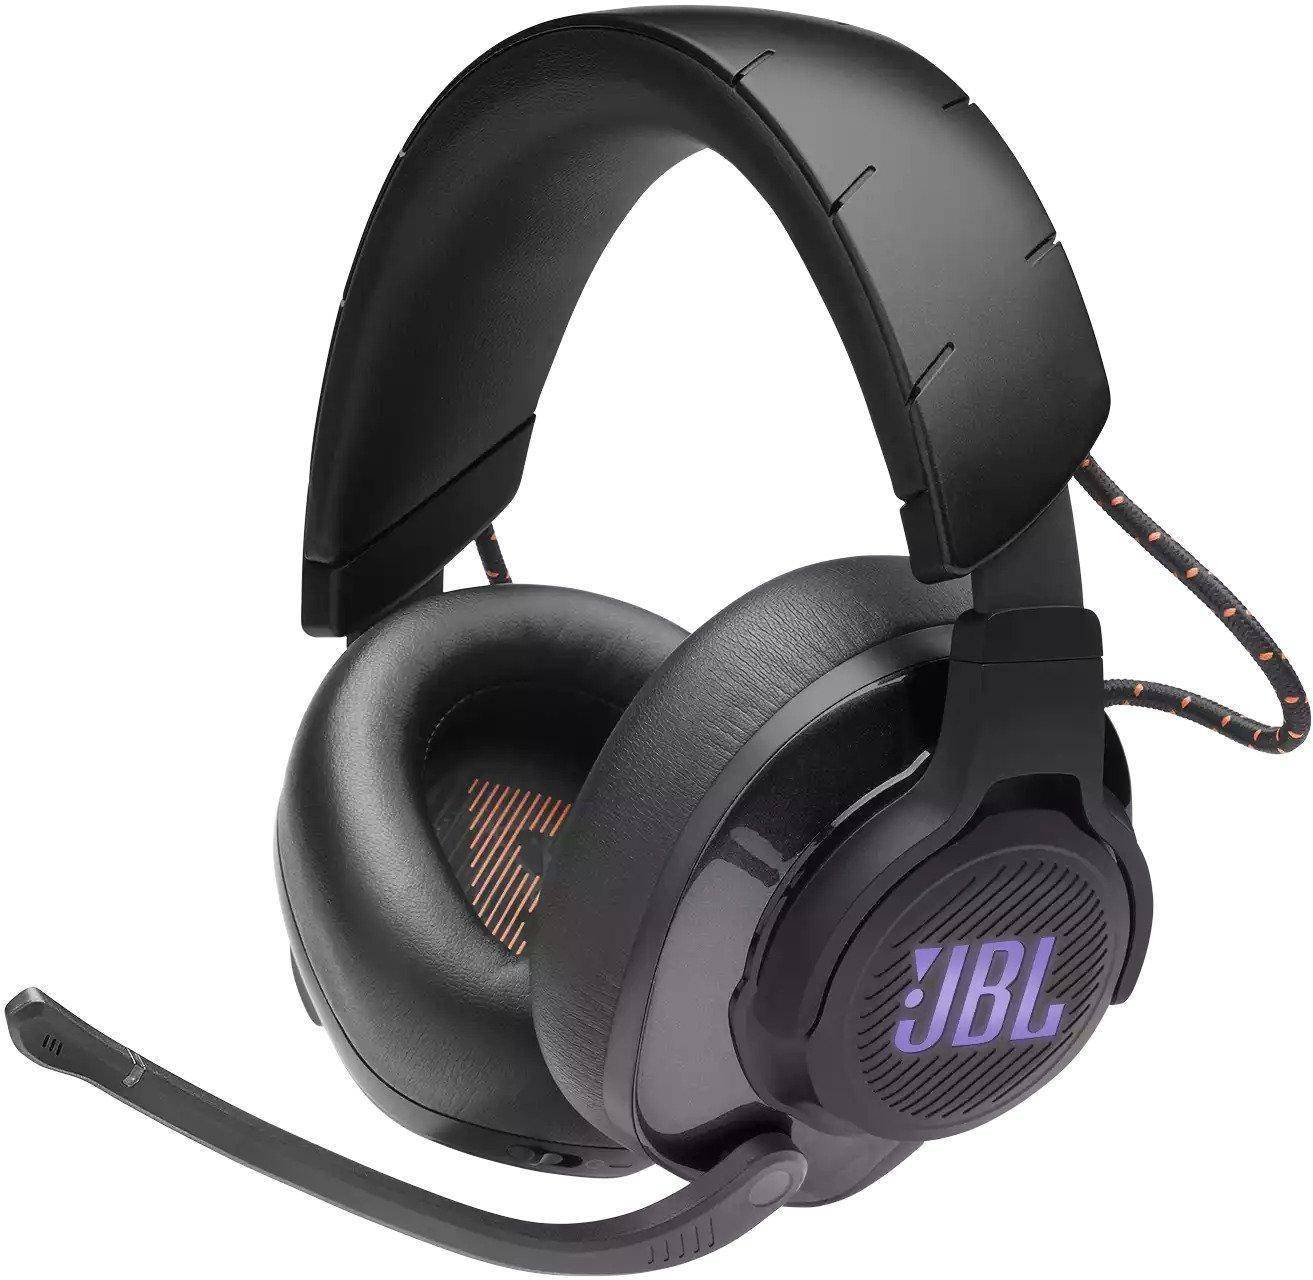 JBL Quantum 600 Wireless Gaming Headset With Surround Sound And Game Chat Balance Dial zoom image